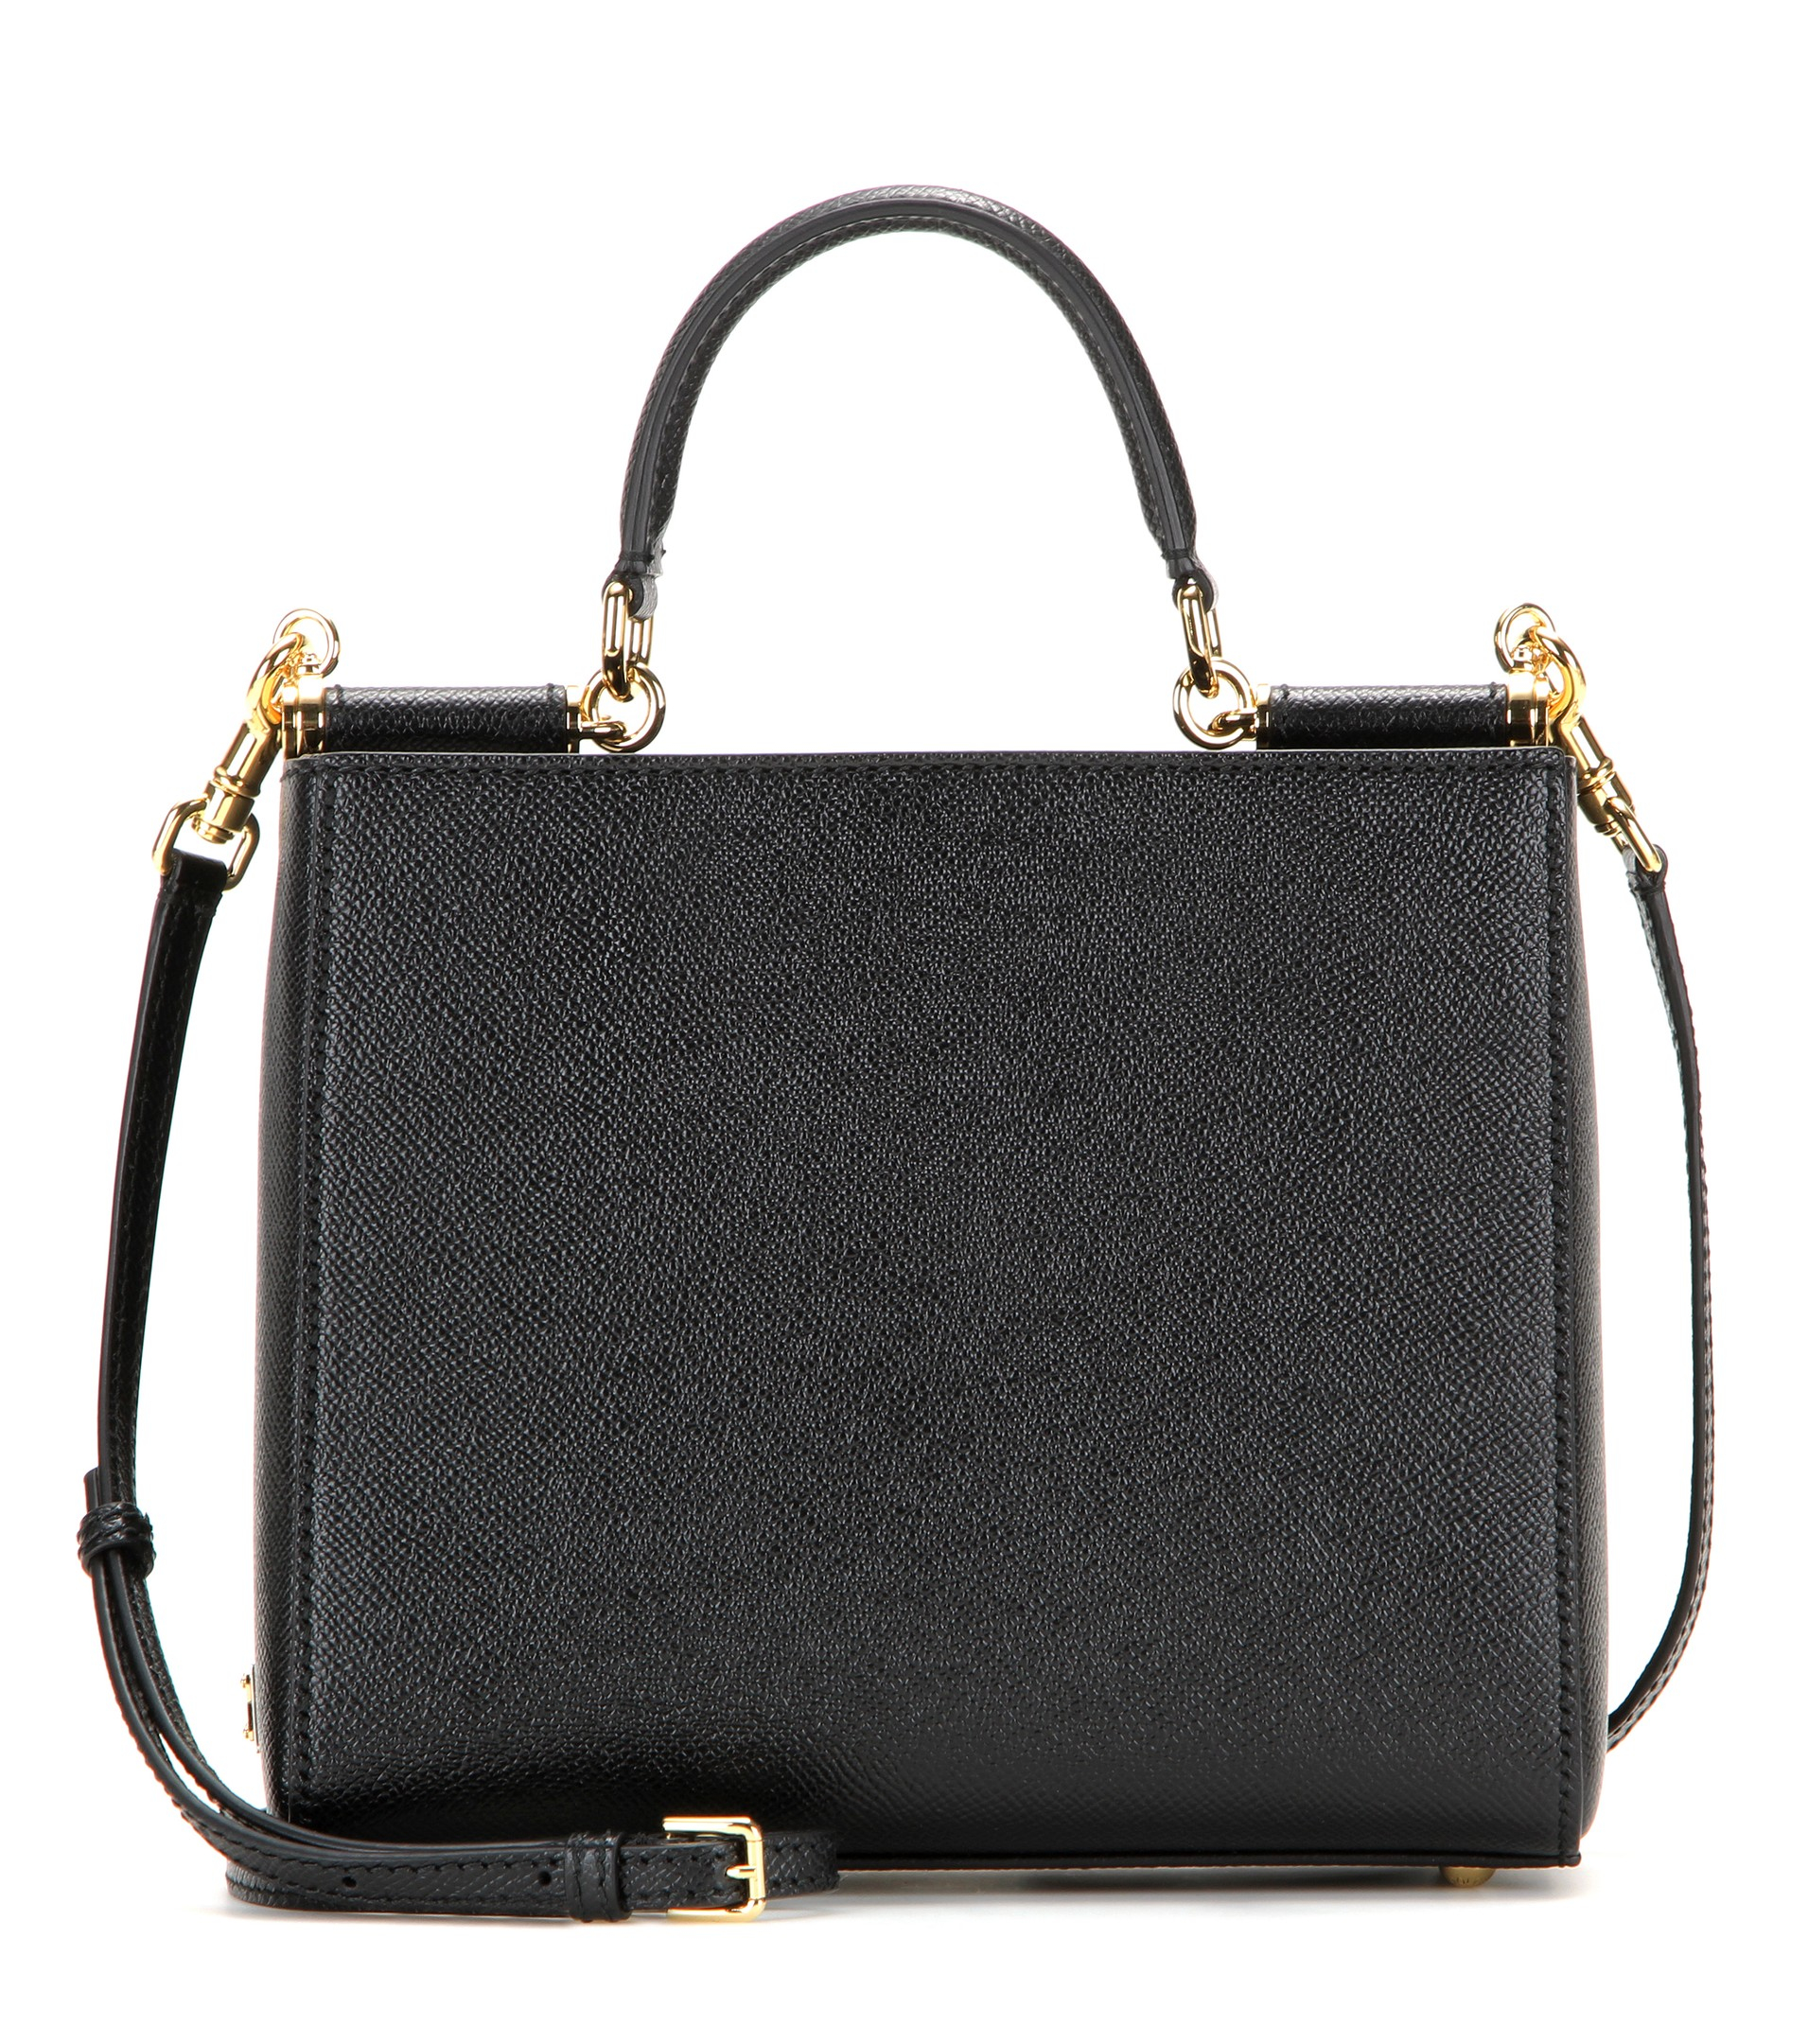 Lyst - Dolce & Gabbana Small Square Leather Shoulder Bag in Black